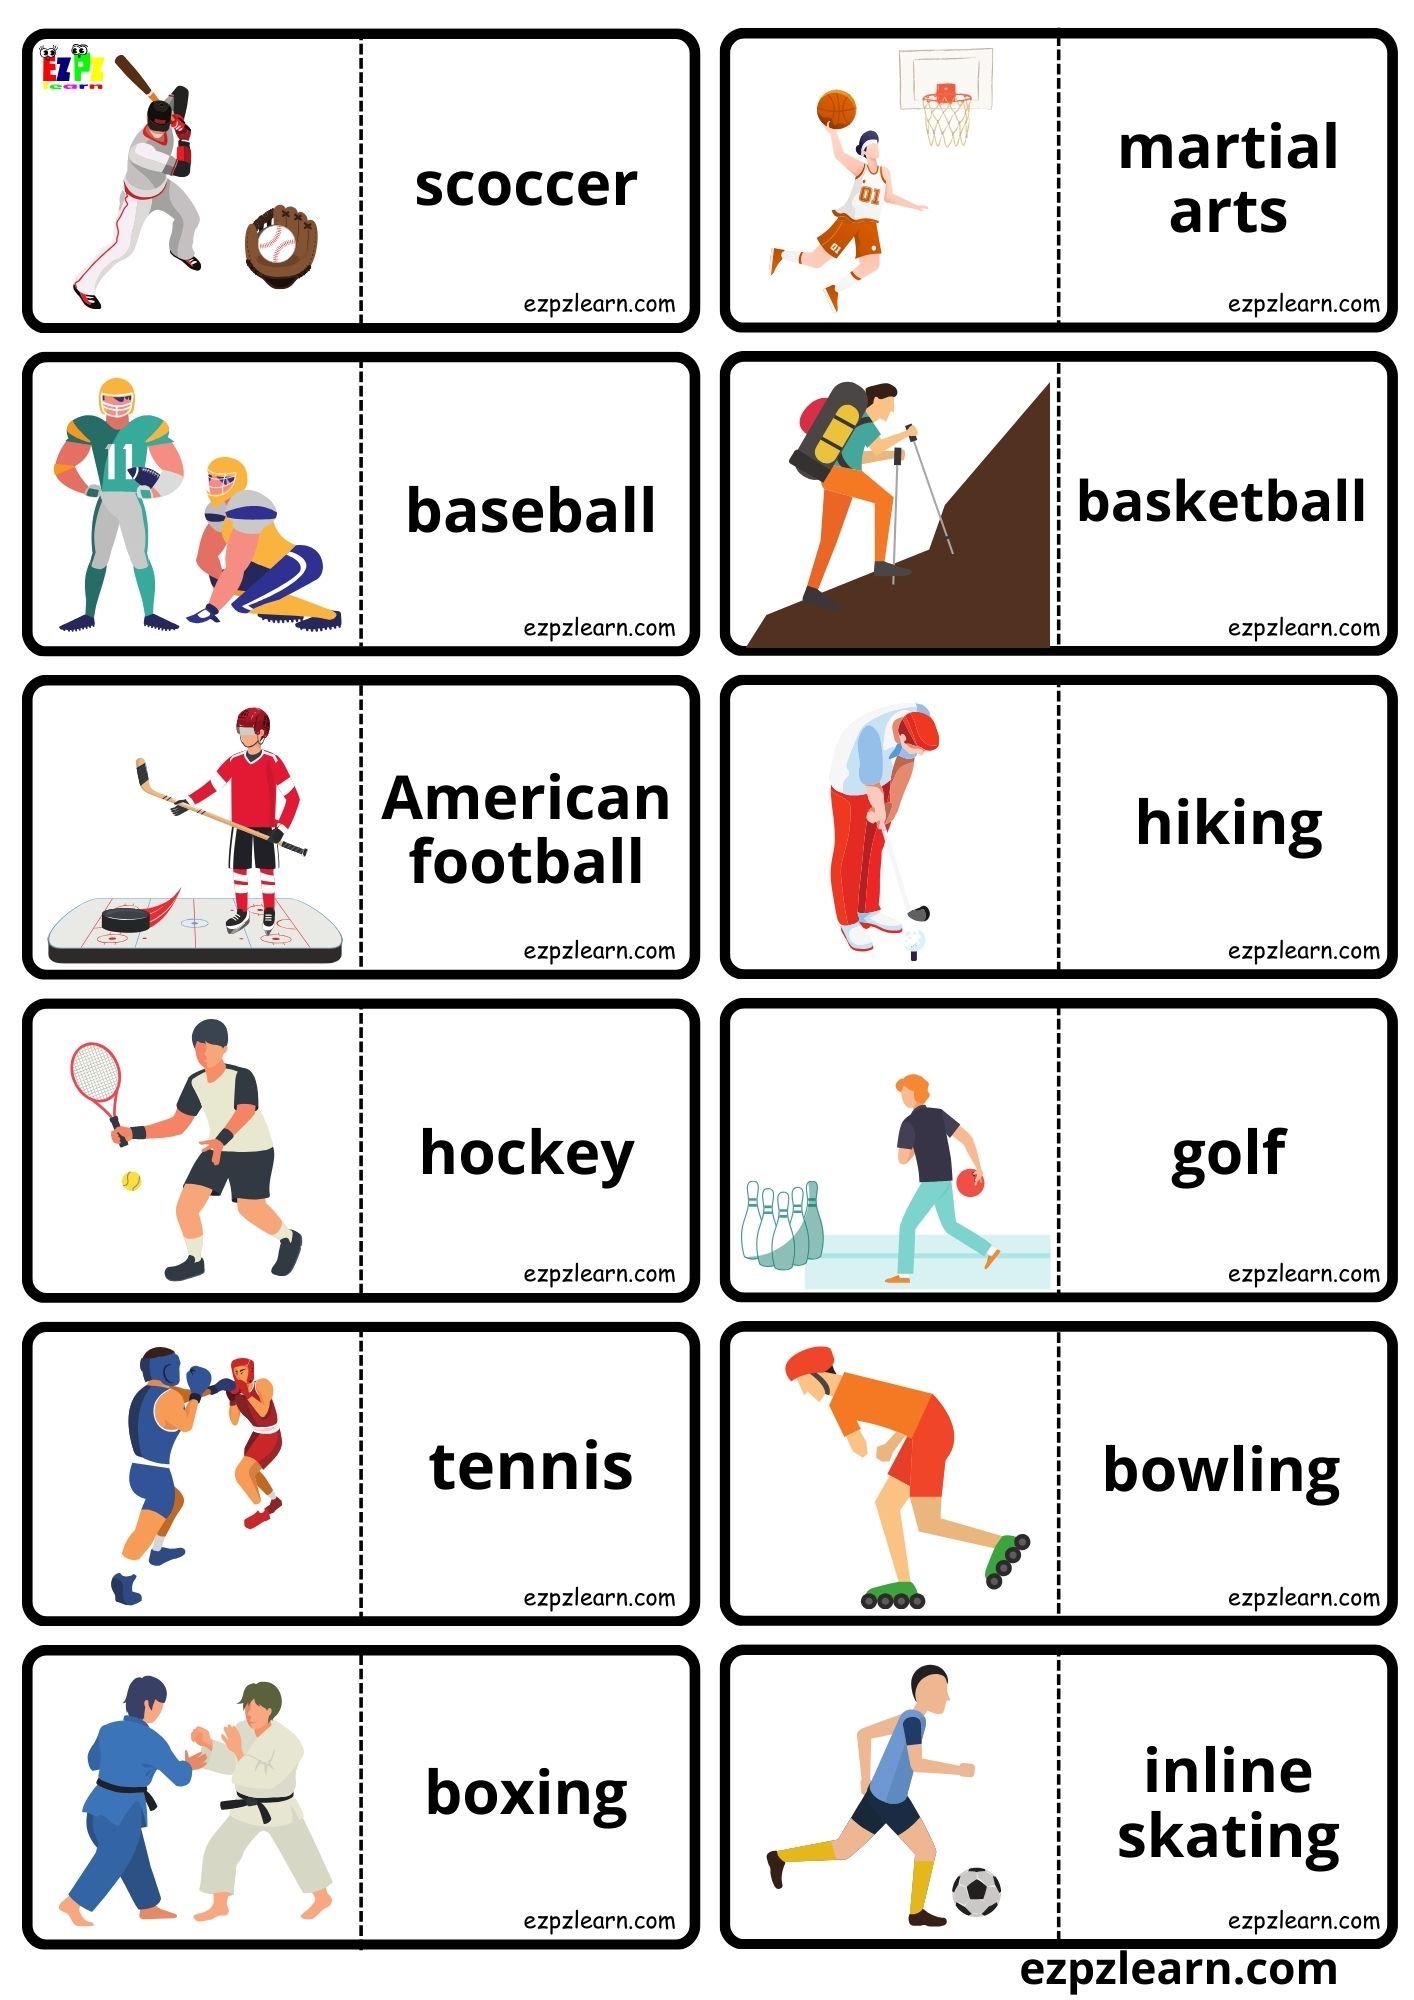 Sports Vocabulary With Pictures - Kidpid